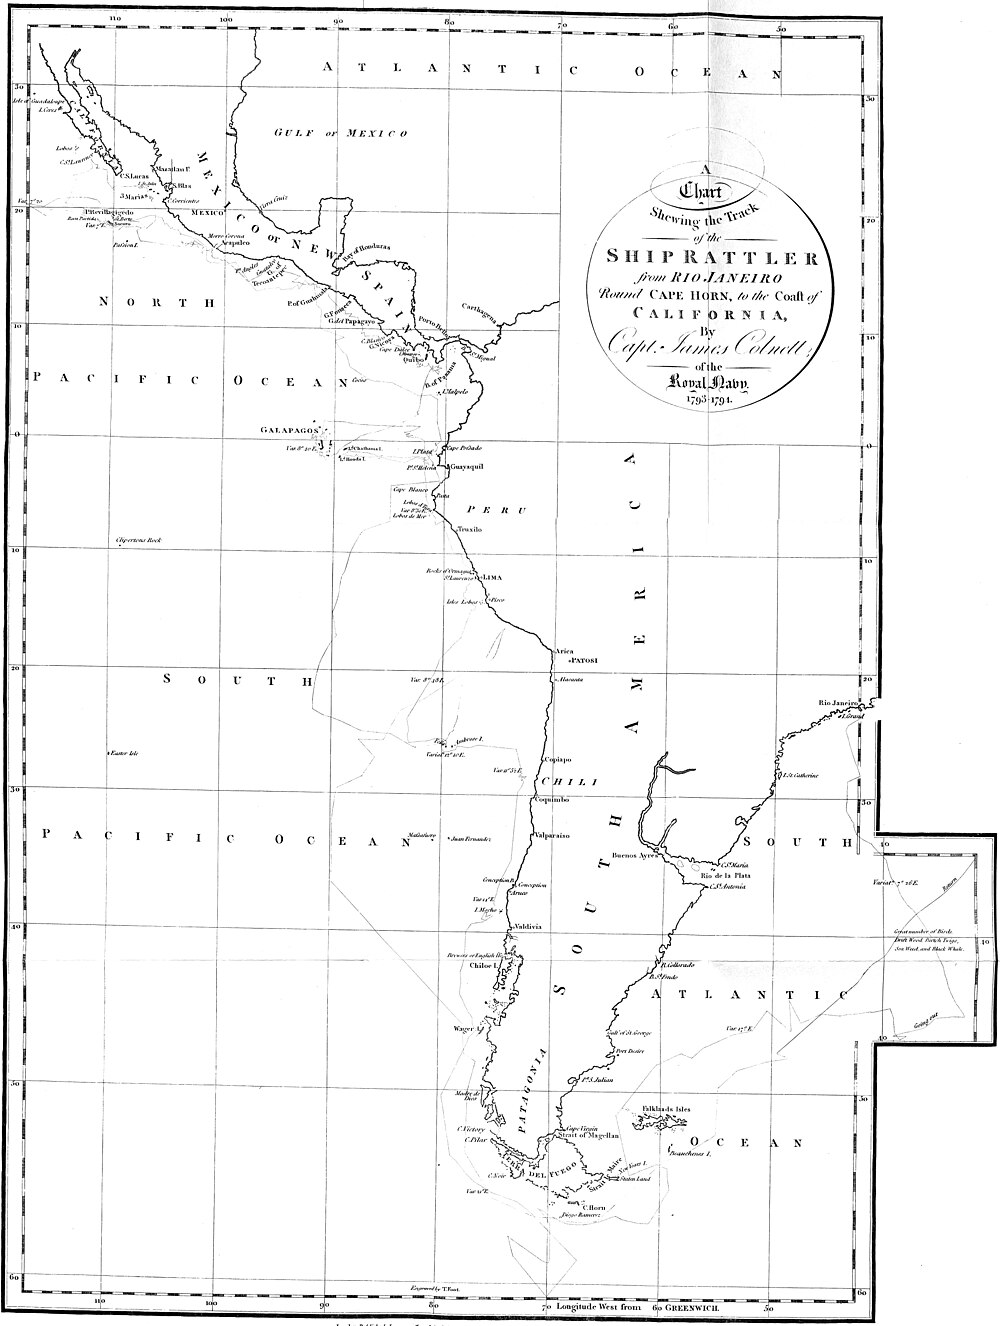 A Chart Shewing the Track of the Ship Rattler from Rio Janeiro Round Cape Horn, to the Coast of California, By Capt. James Colnett of the Royal Navy. 1793-1794.